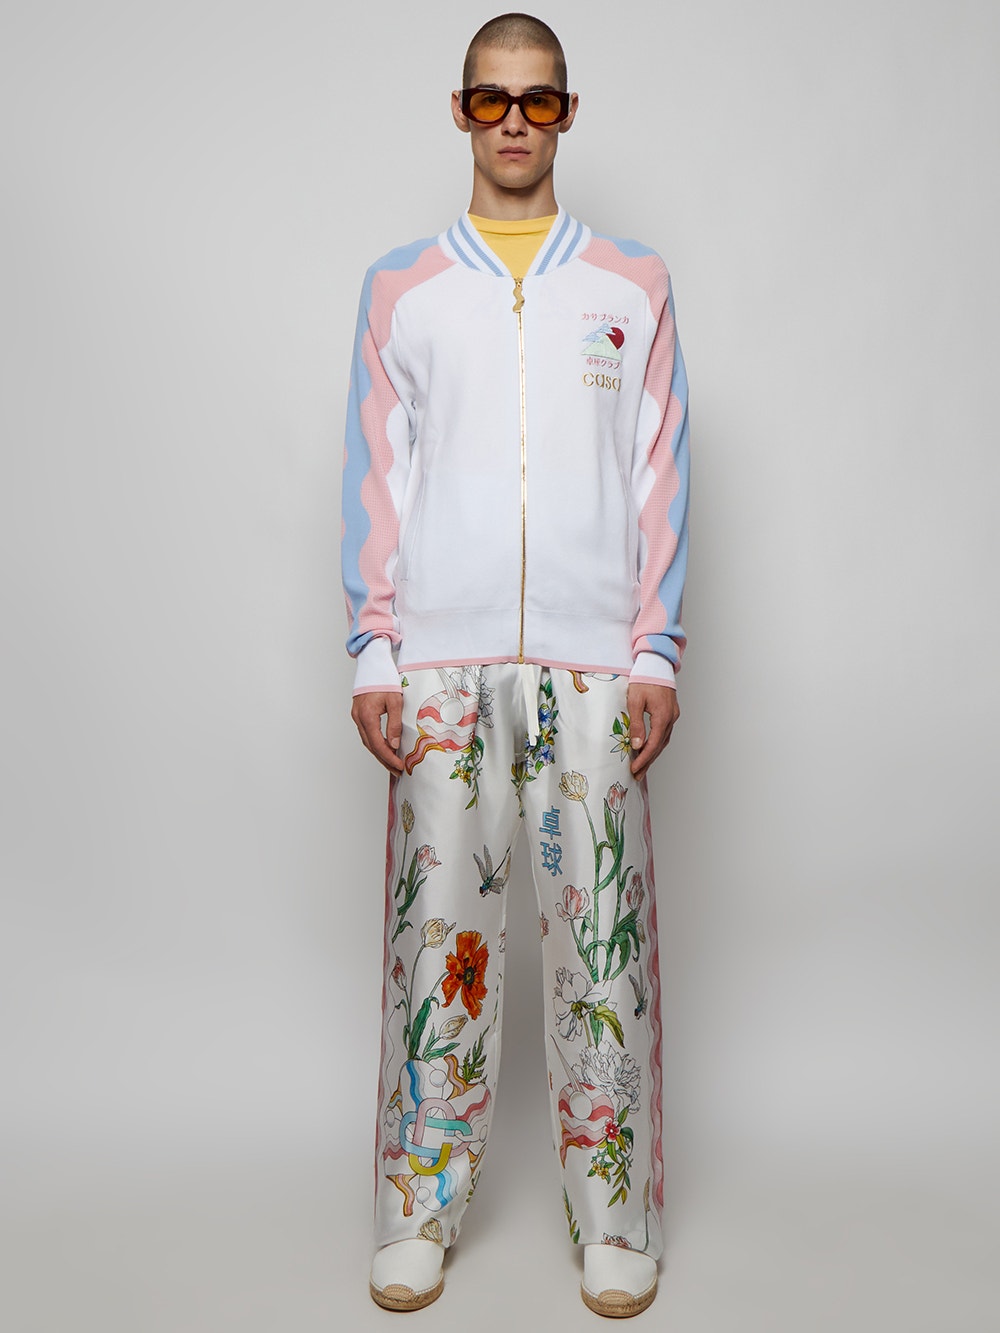 Track Jacket White Light Pink And Blue